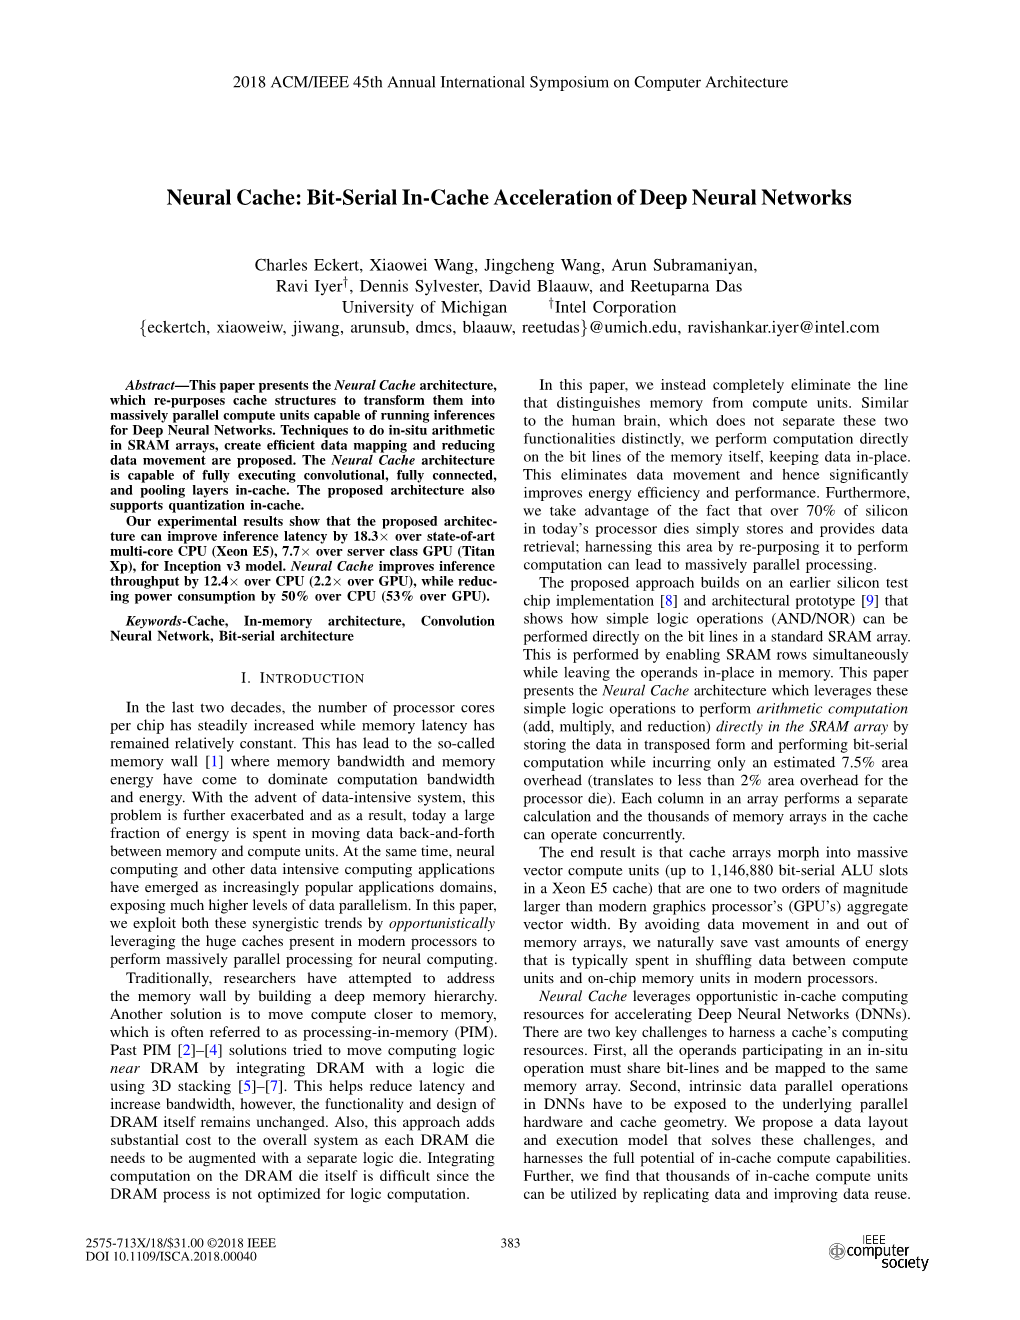 Bit-Serial In-Cache Acceleration of Deep Neural Networks